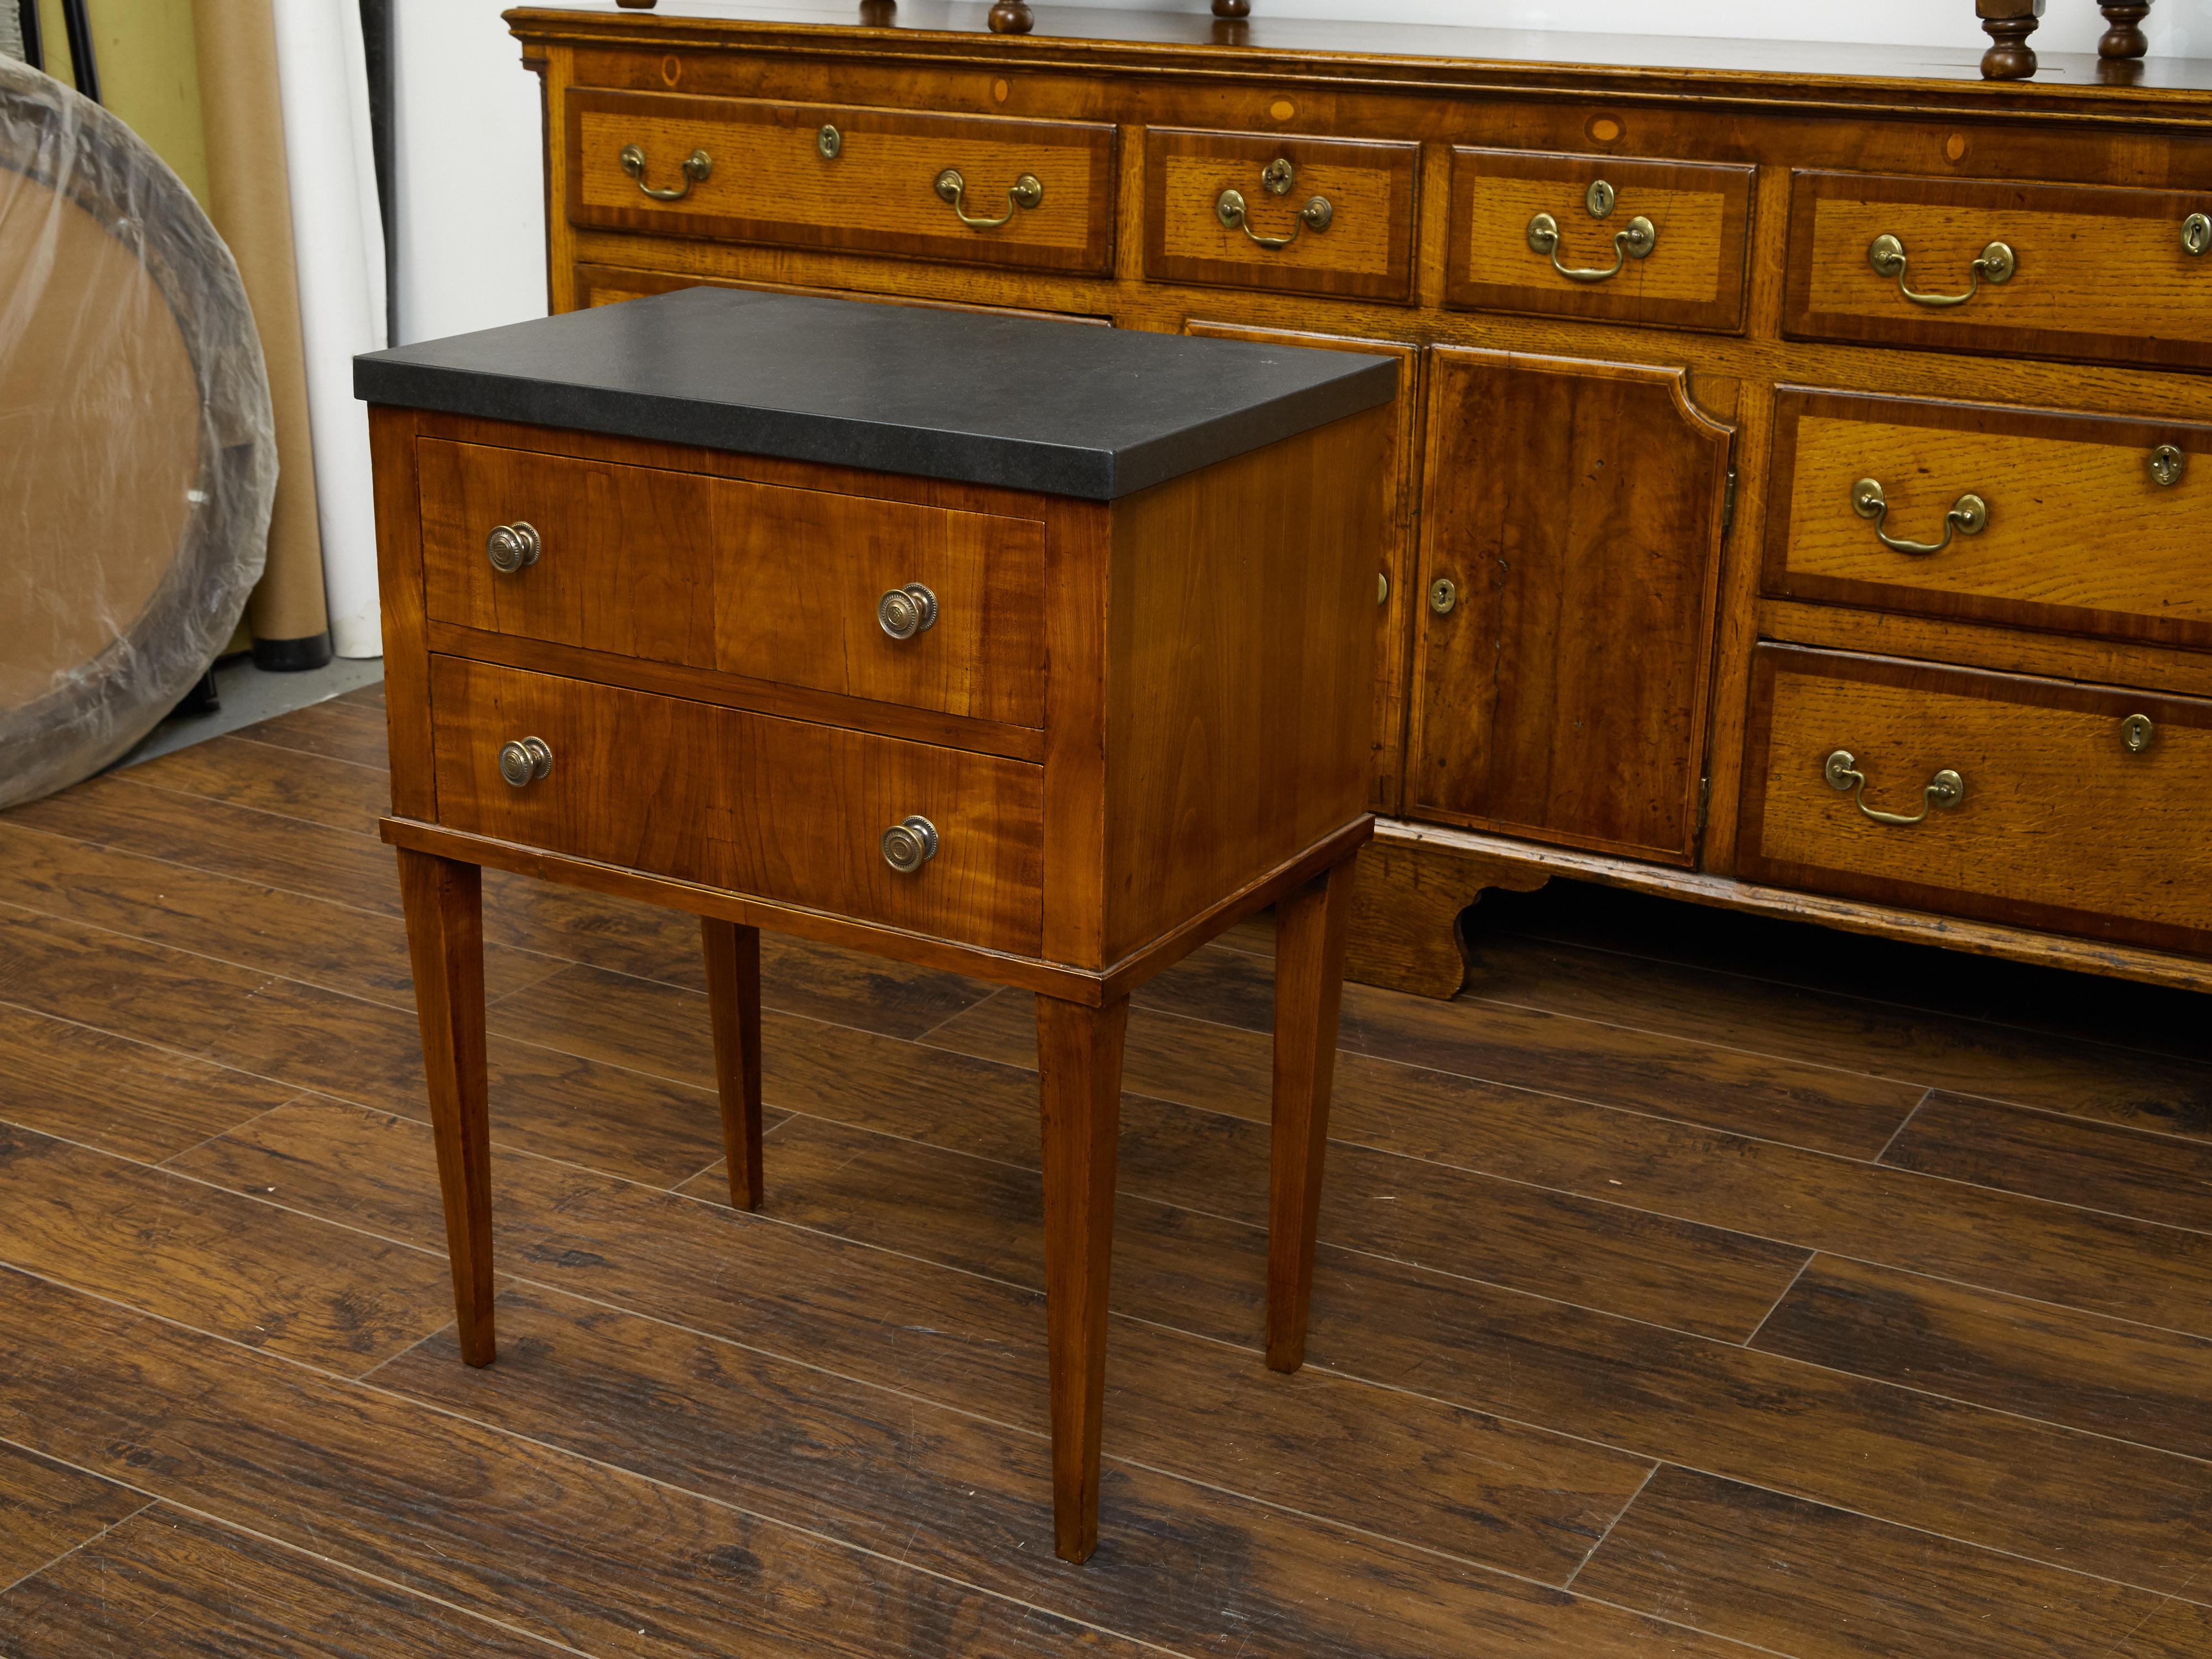 A French Restauration period walnut 'table de chevet' from the early 19th century, with marble top and two drawers. Created in France during the first quarter of the 19th century, this walnut table features a rectangular black marble top sitting